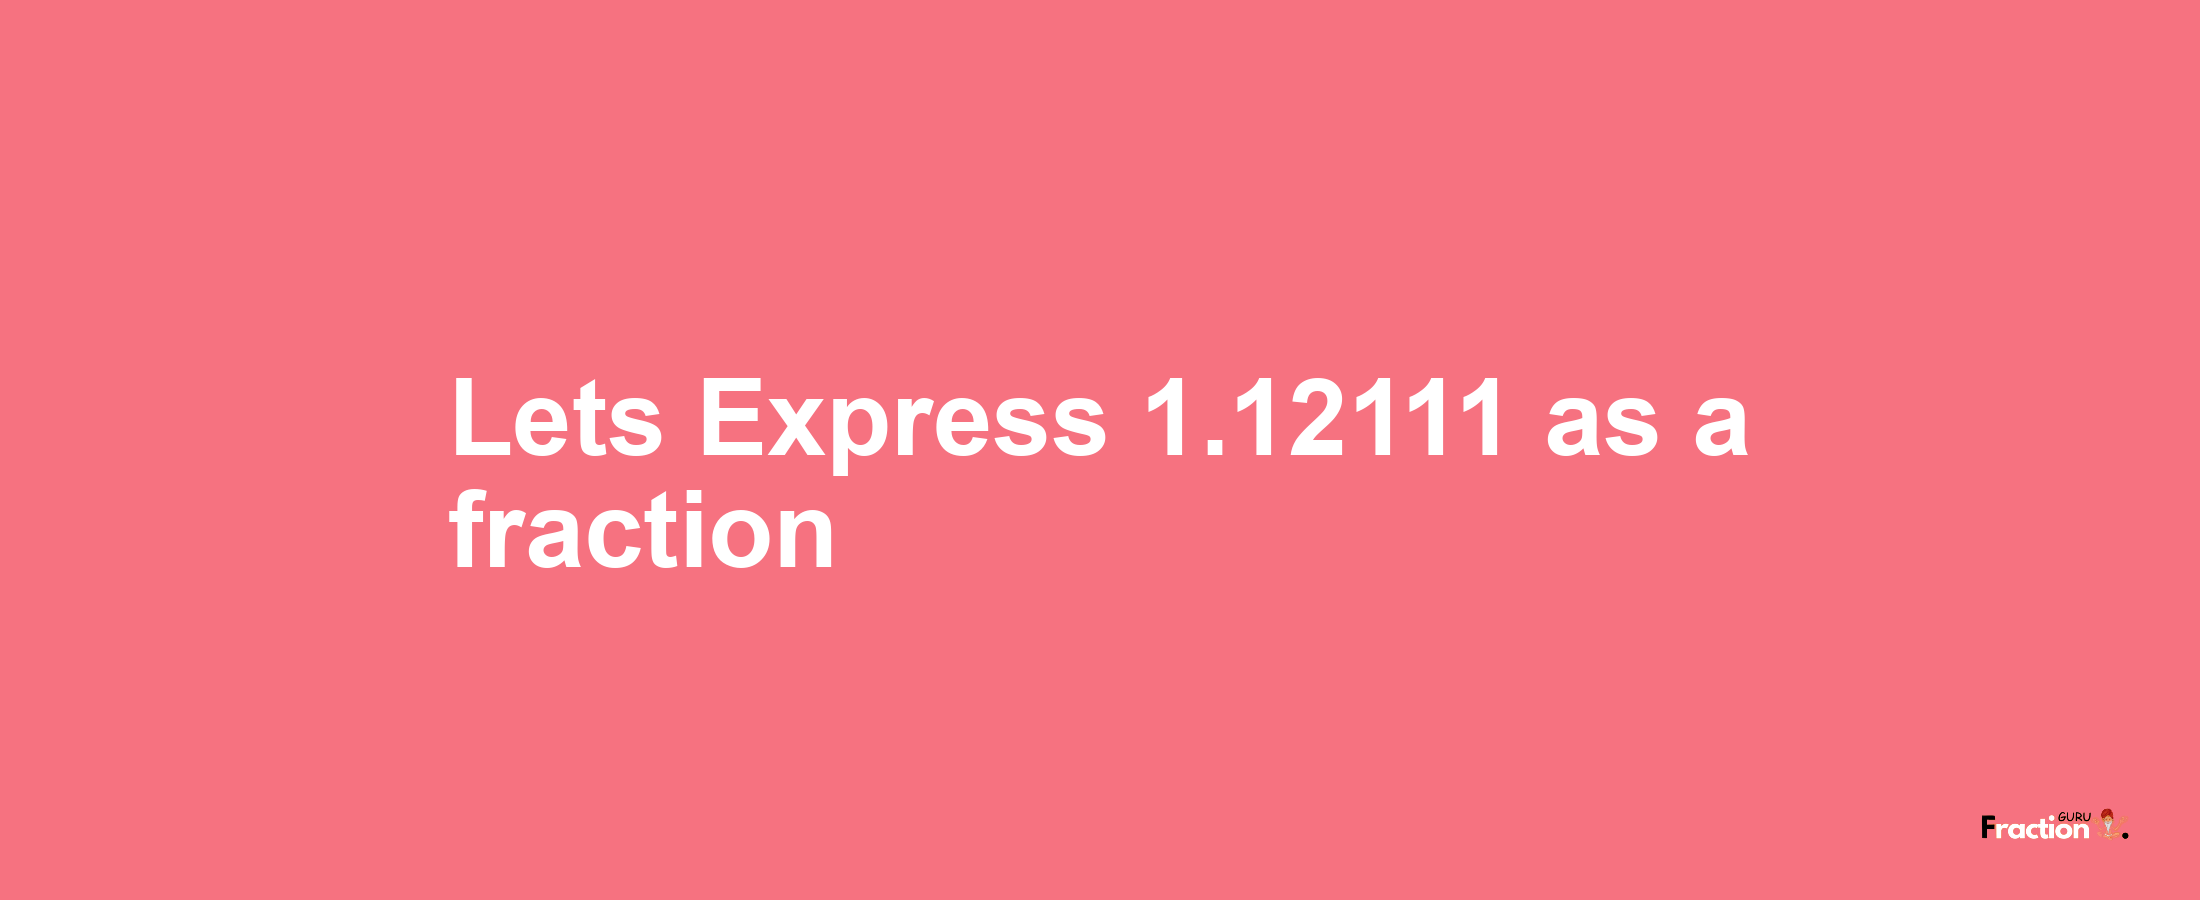 Lets Express 1.12111 as afraction